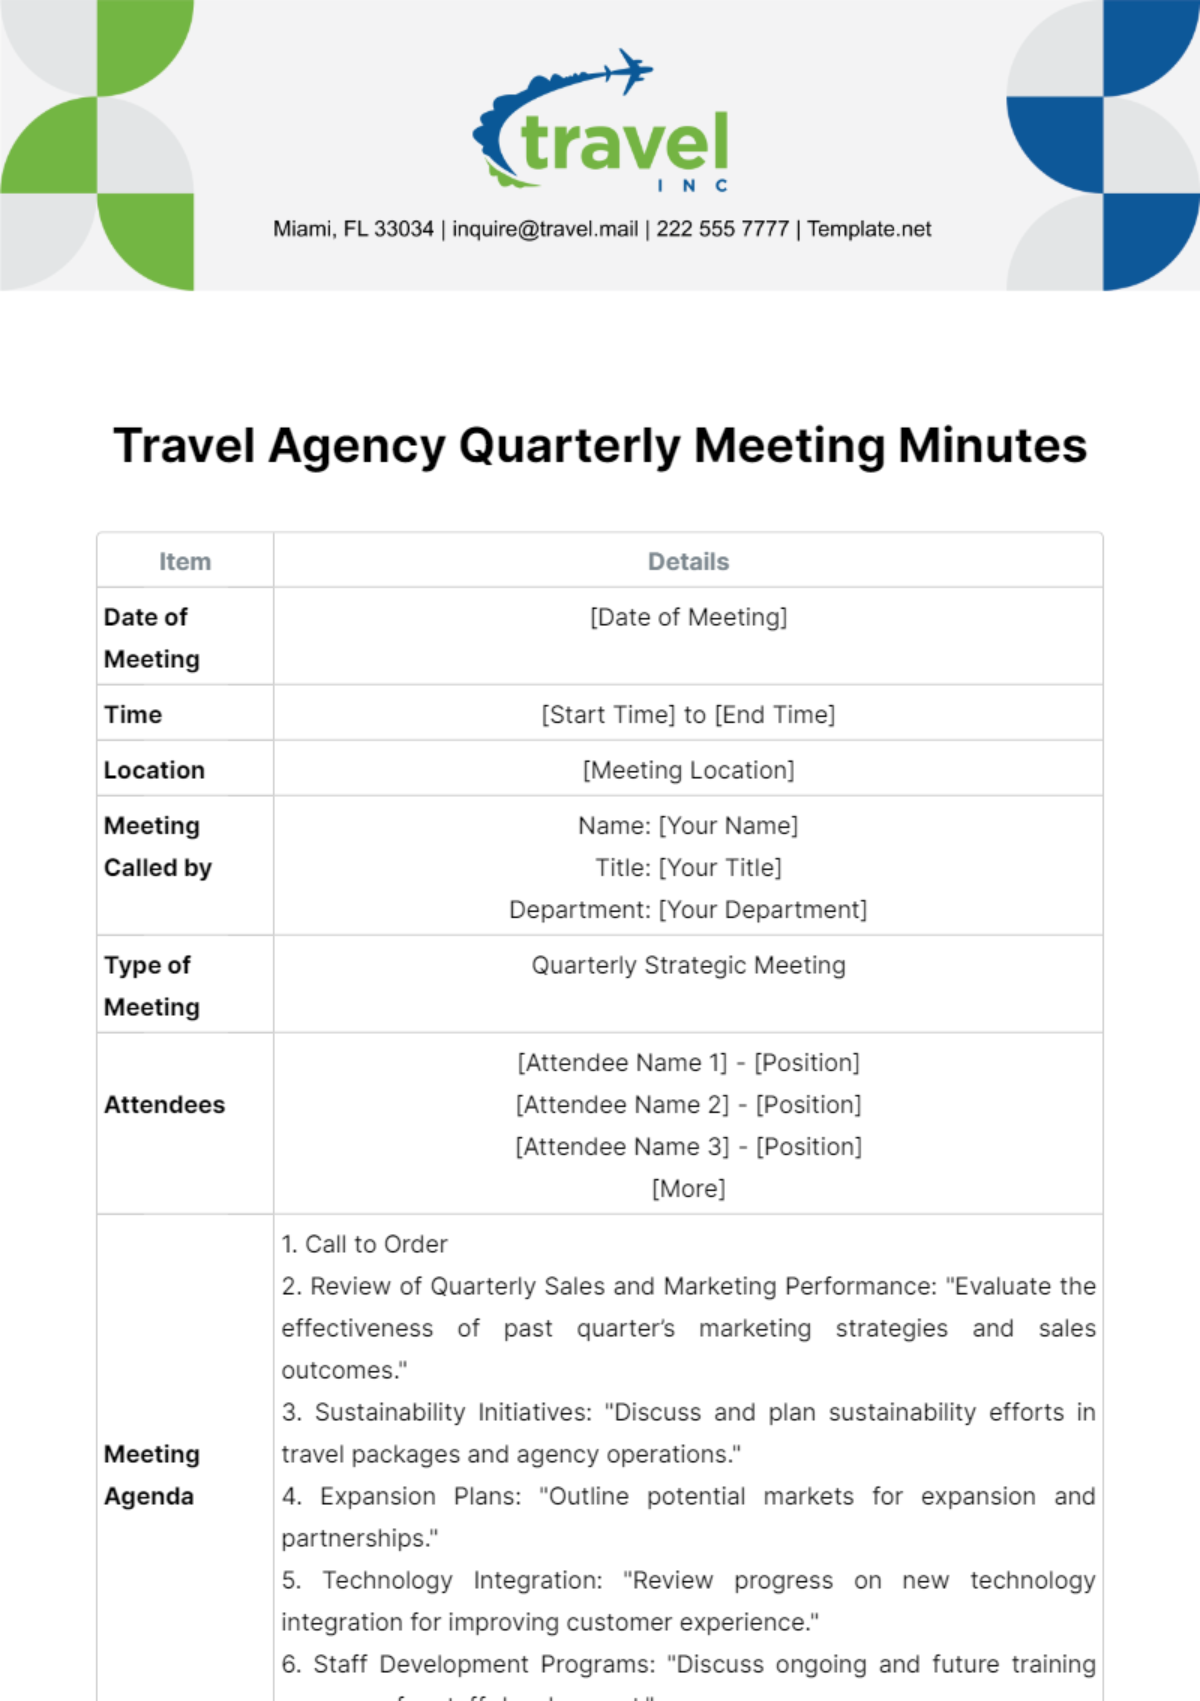 Travel Agency Quarterly Meeting Minutes Template